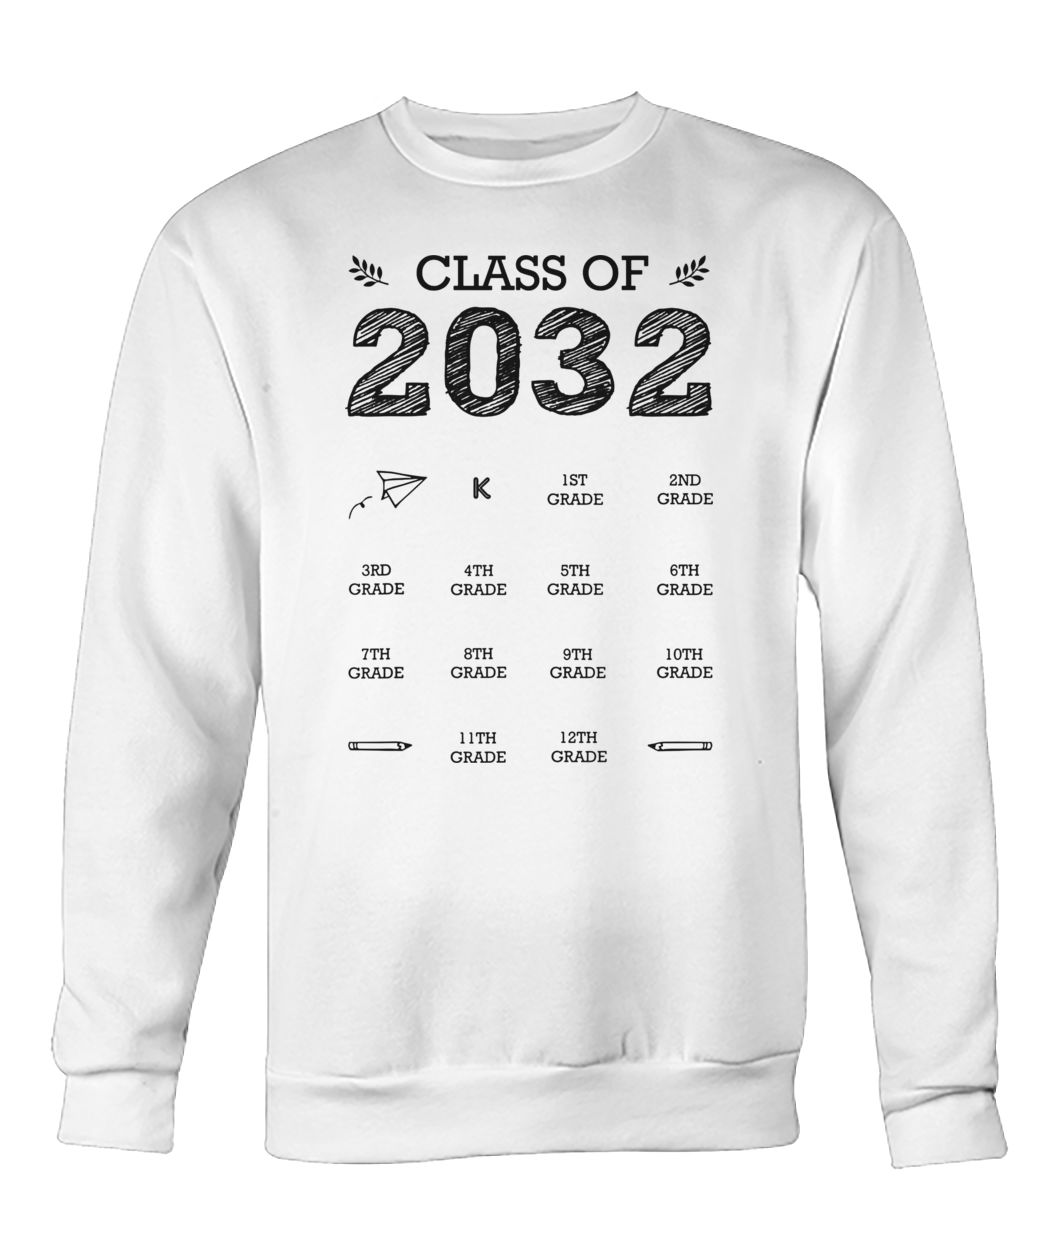 Class of 2032 grow with me with space for check marks crew neck sweatshirt